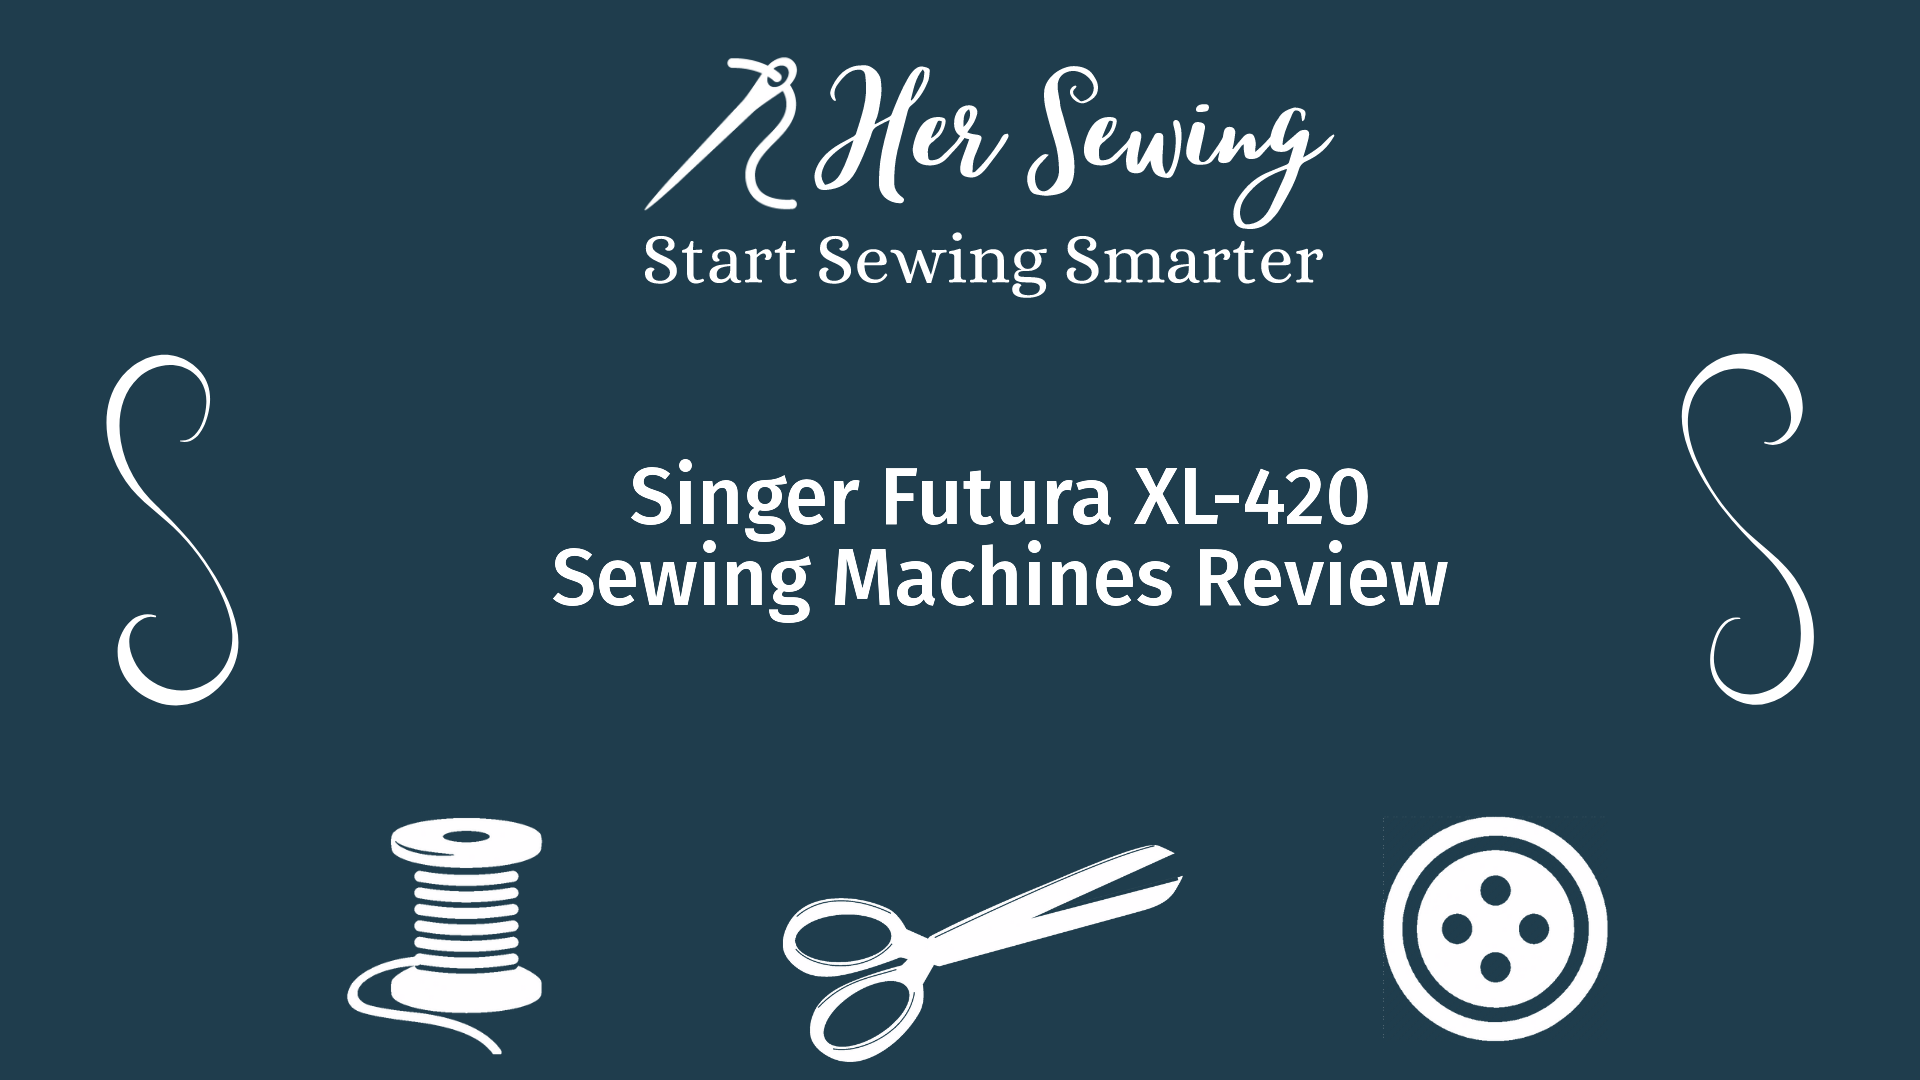 Singer Futura XL-420 Sewing Machines Review